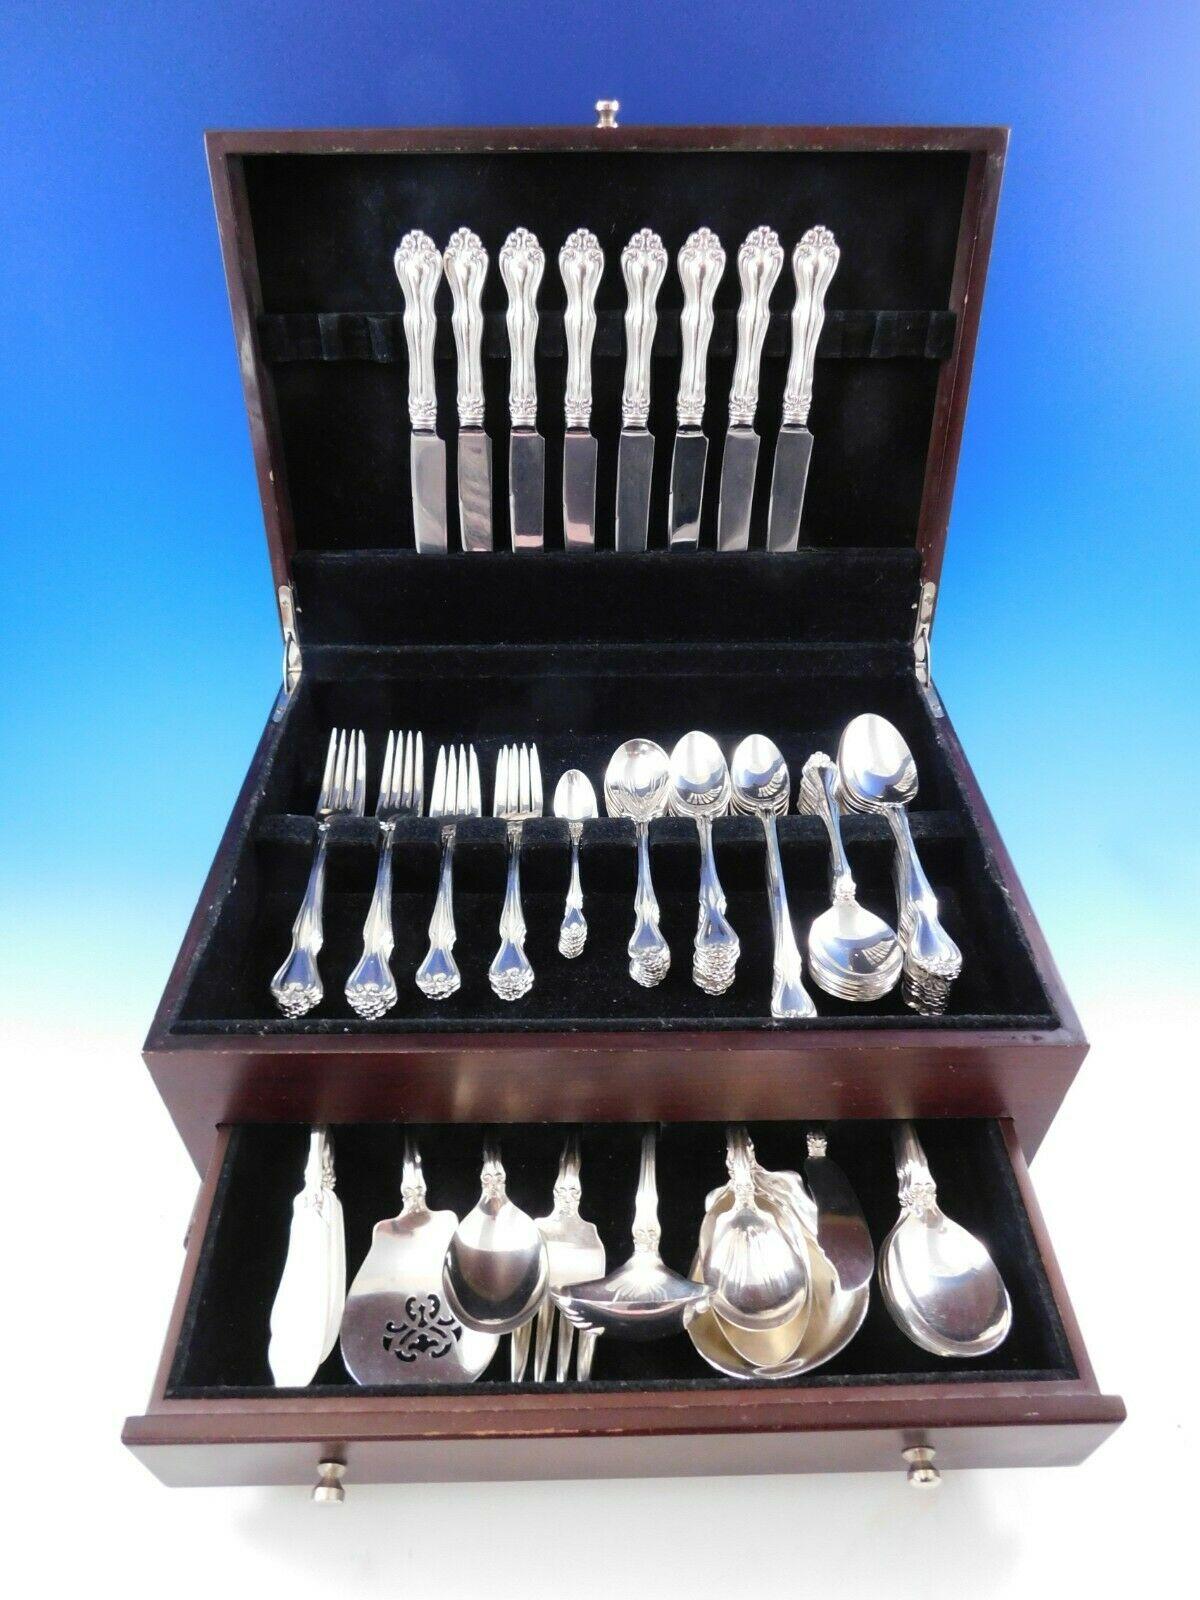 Gorgeous George & Martha by Westmorland sterling silver flatware set, 95 pieces. This set includes:

8 knives, 8 3/4